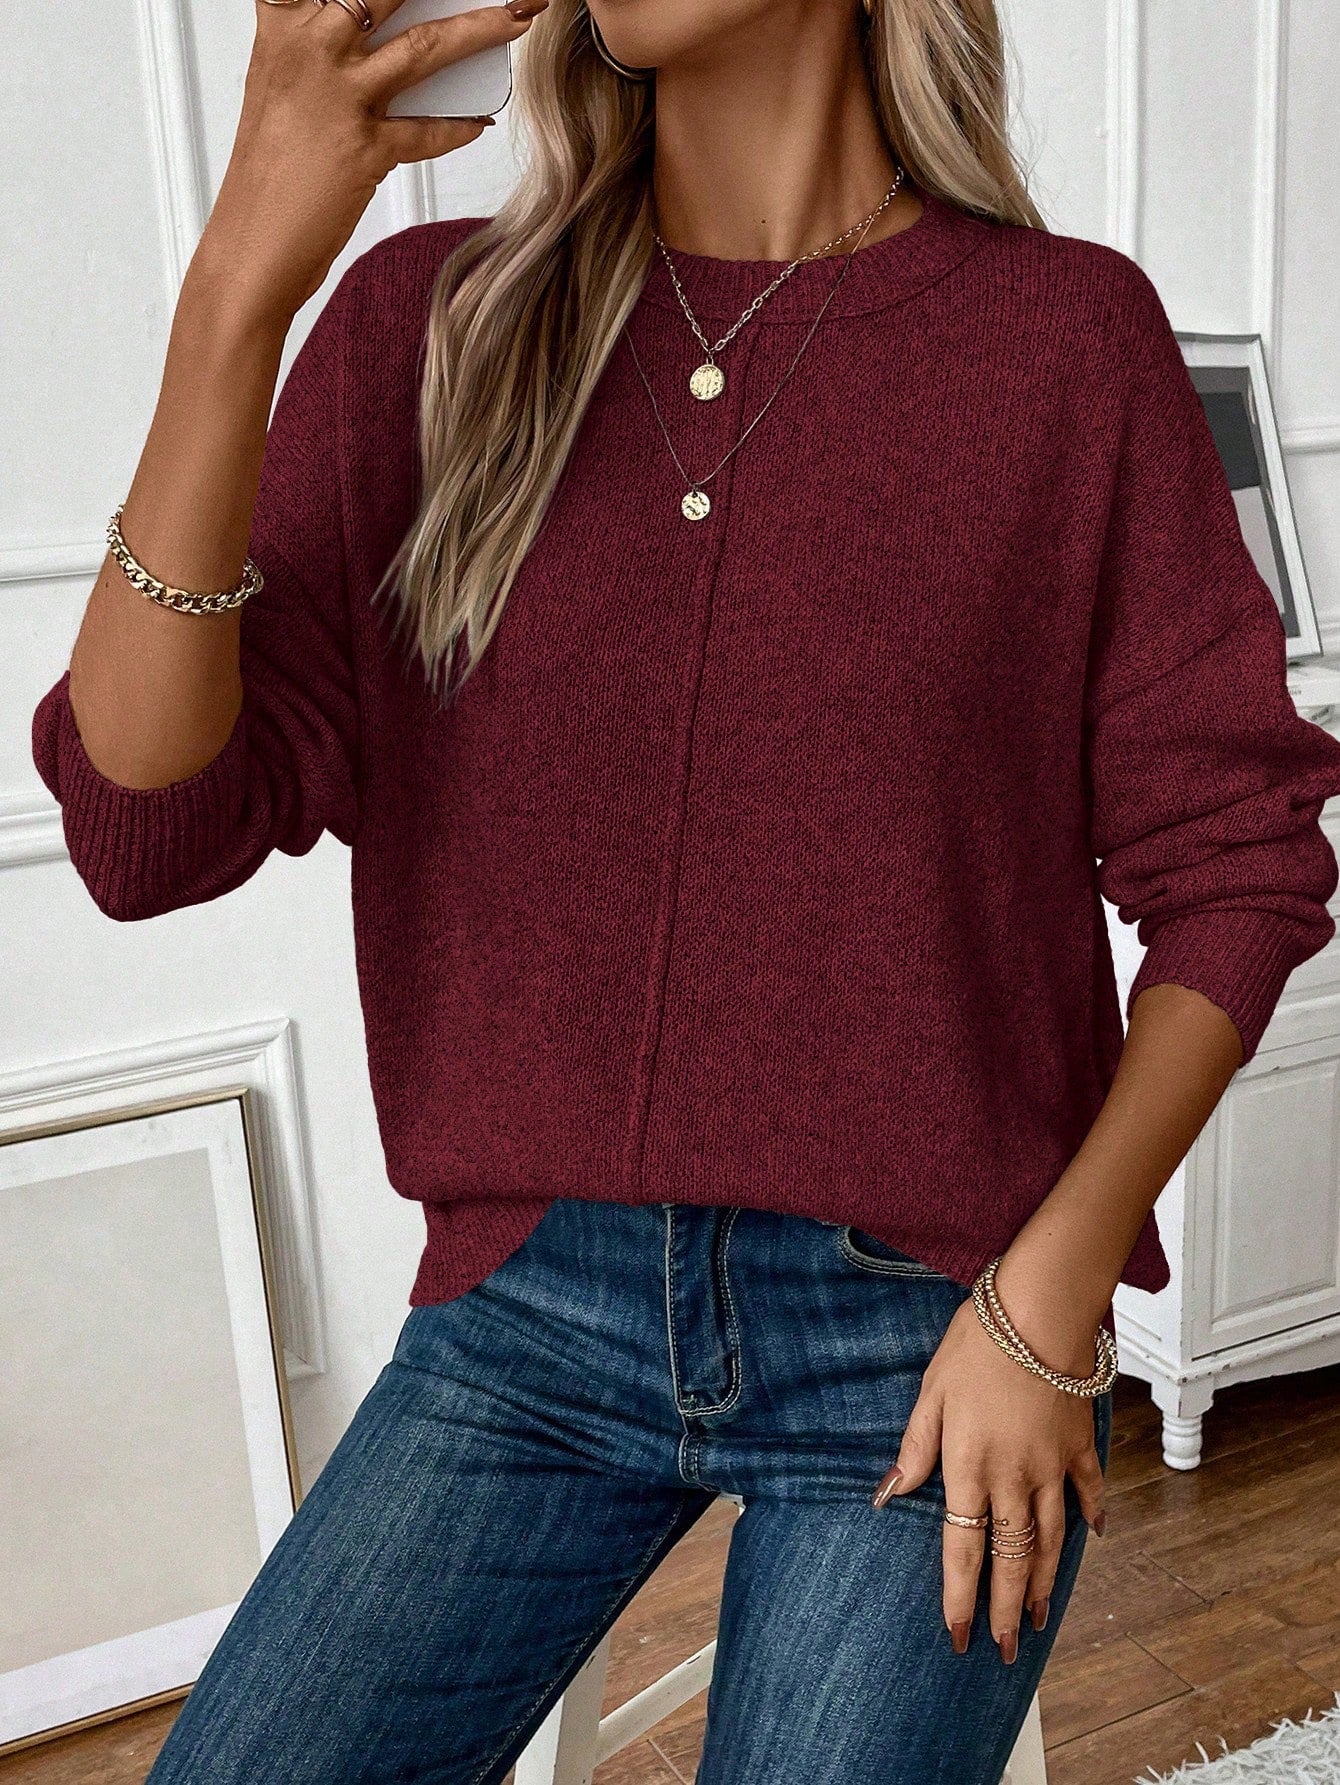 Frenchy Ladies' Solid Color Drop Shoulder Casual Sweater